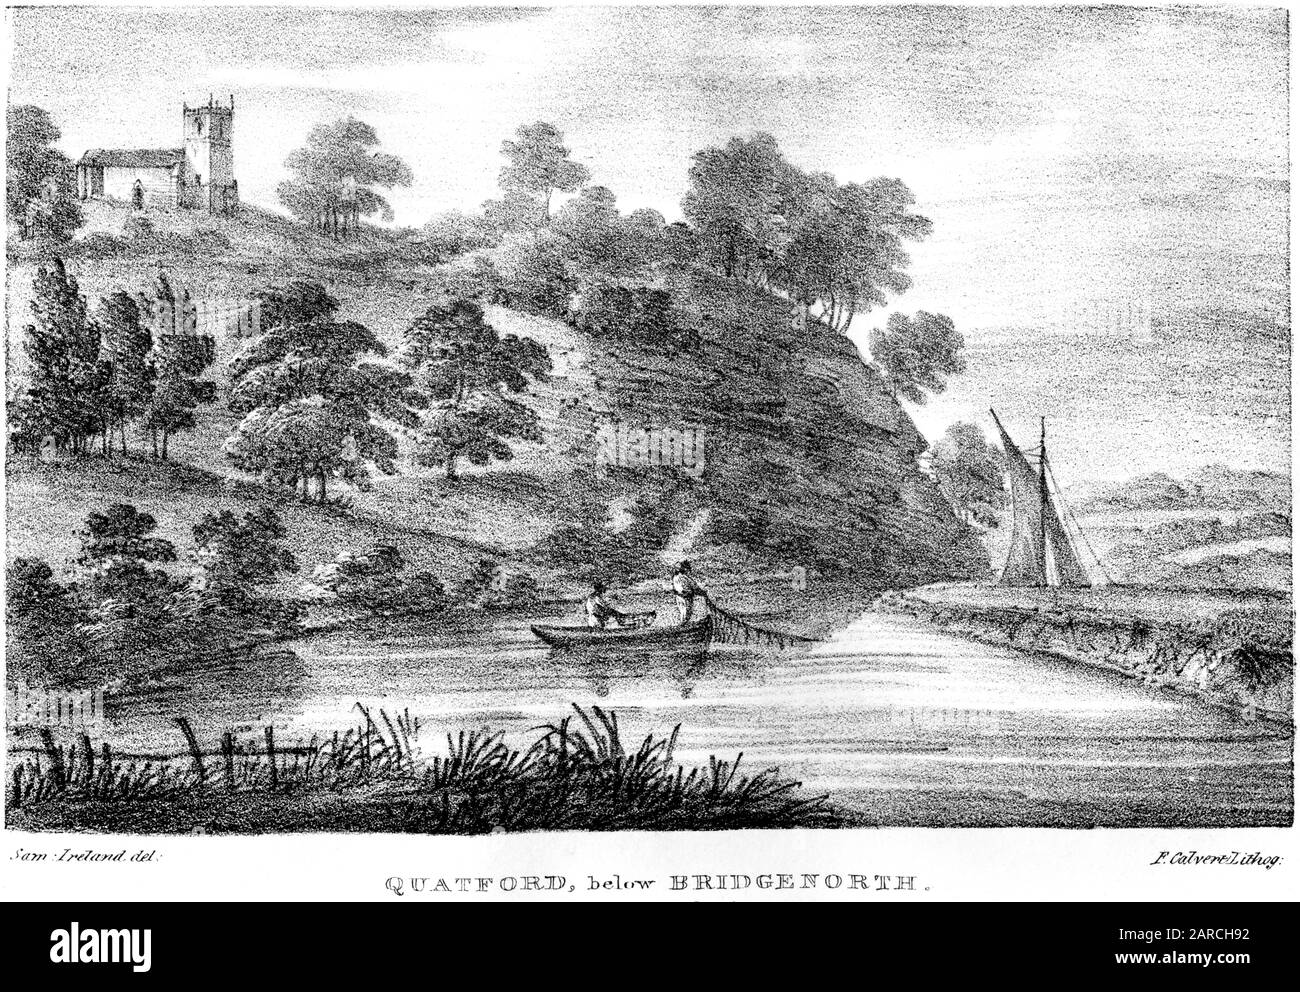 A lithograph of Quatford, below Bridgenorth (Bridgnorth) scanned at high resolution. from a book printed in 1824.  Believed copyright free. Stock Photo